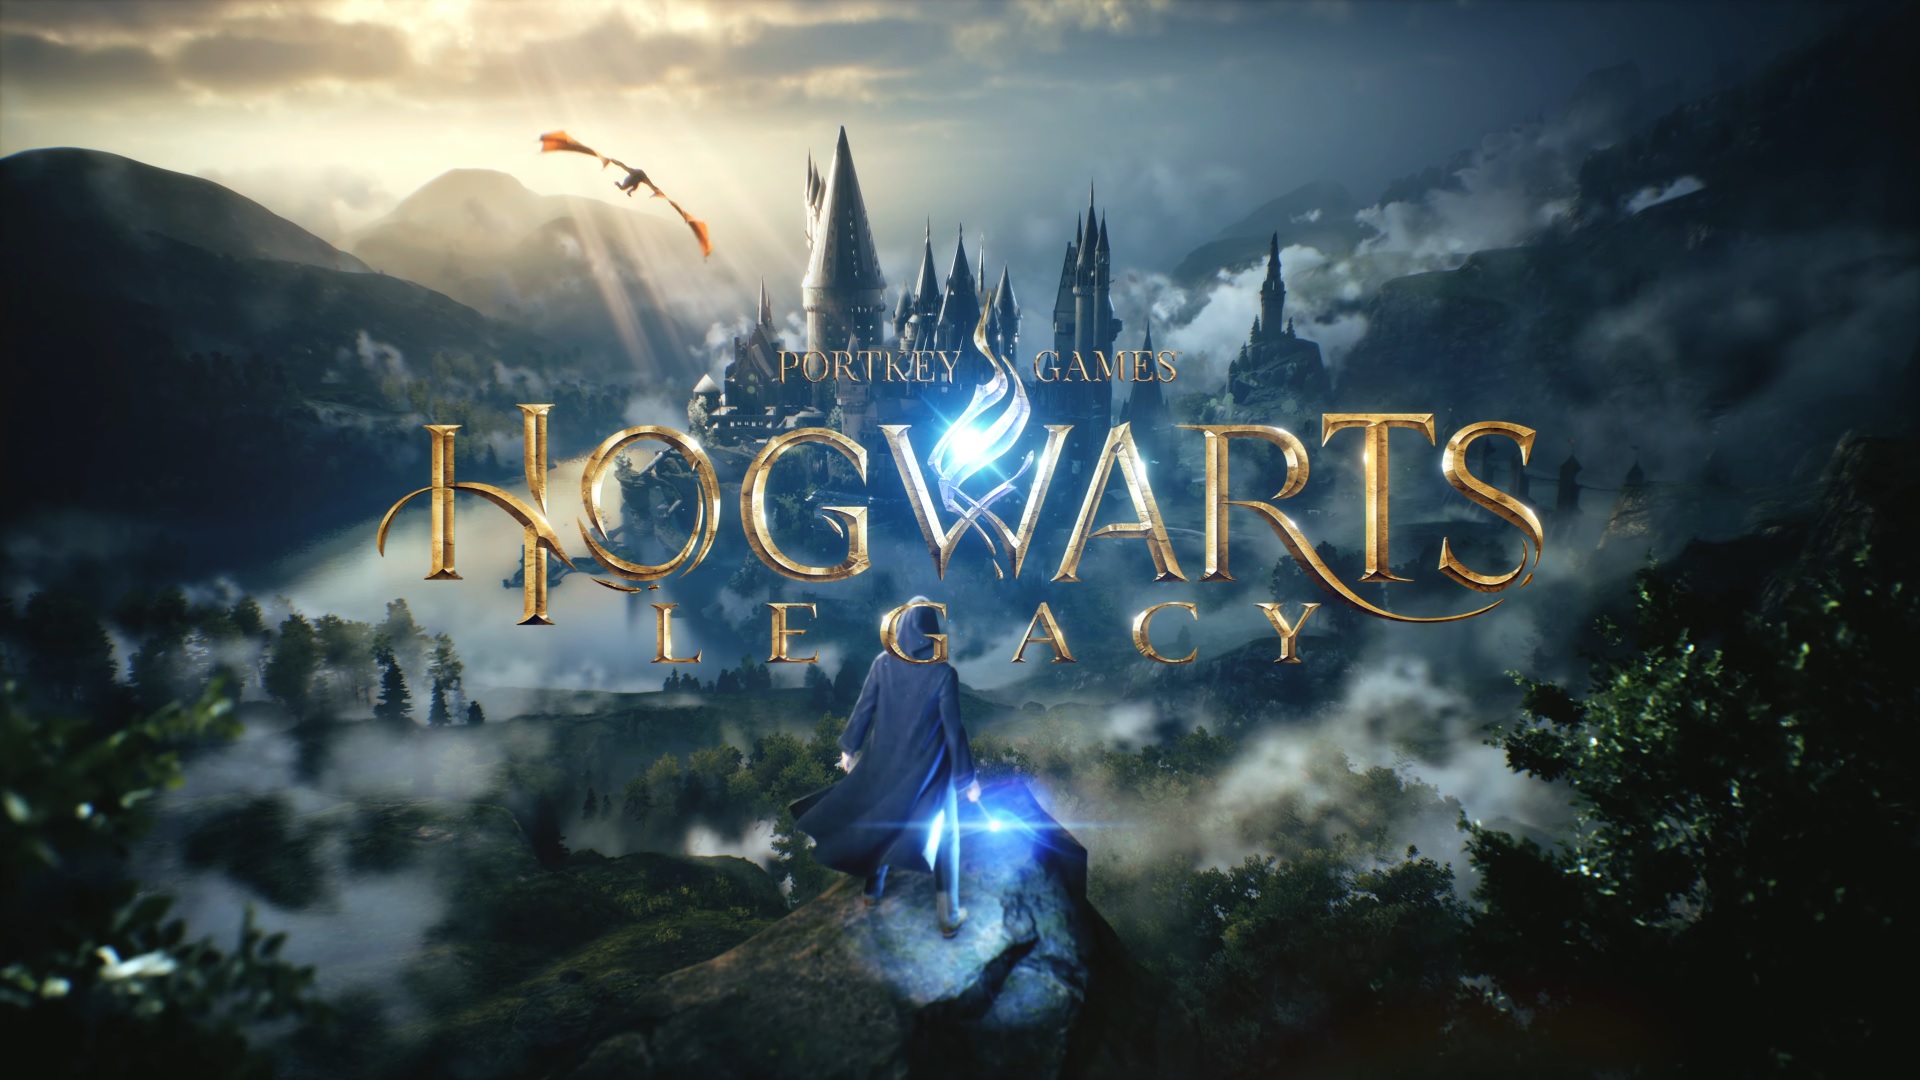 Ravishing Witches and Wizards: The Most Gorgeous Hogwarts Legacy PS5 Trophies!